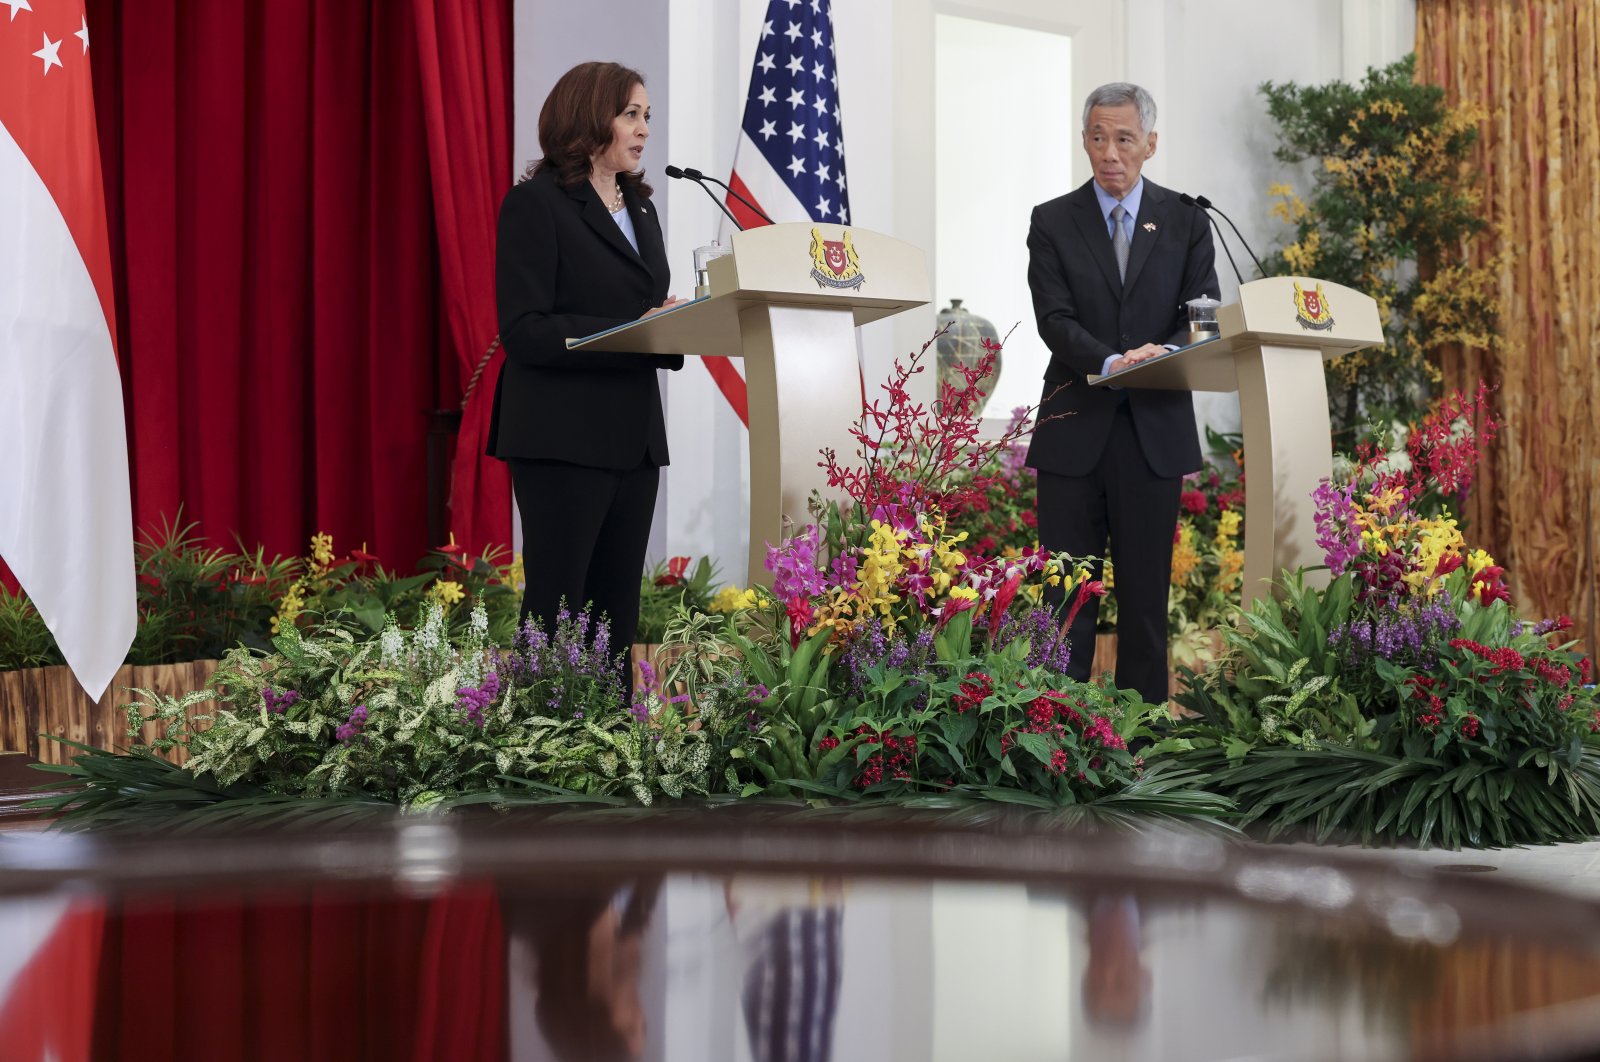 U.S. Vice President Kamala Harris (L) and Singapore's Prime Minister Lee Hsien Loong hold a joint news conference in Singapore, Aug. 23, 2021. (AP Photo)